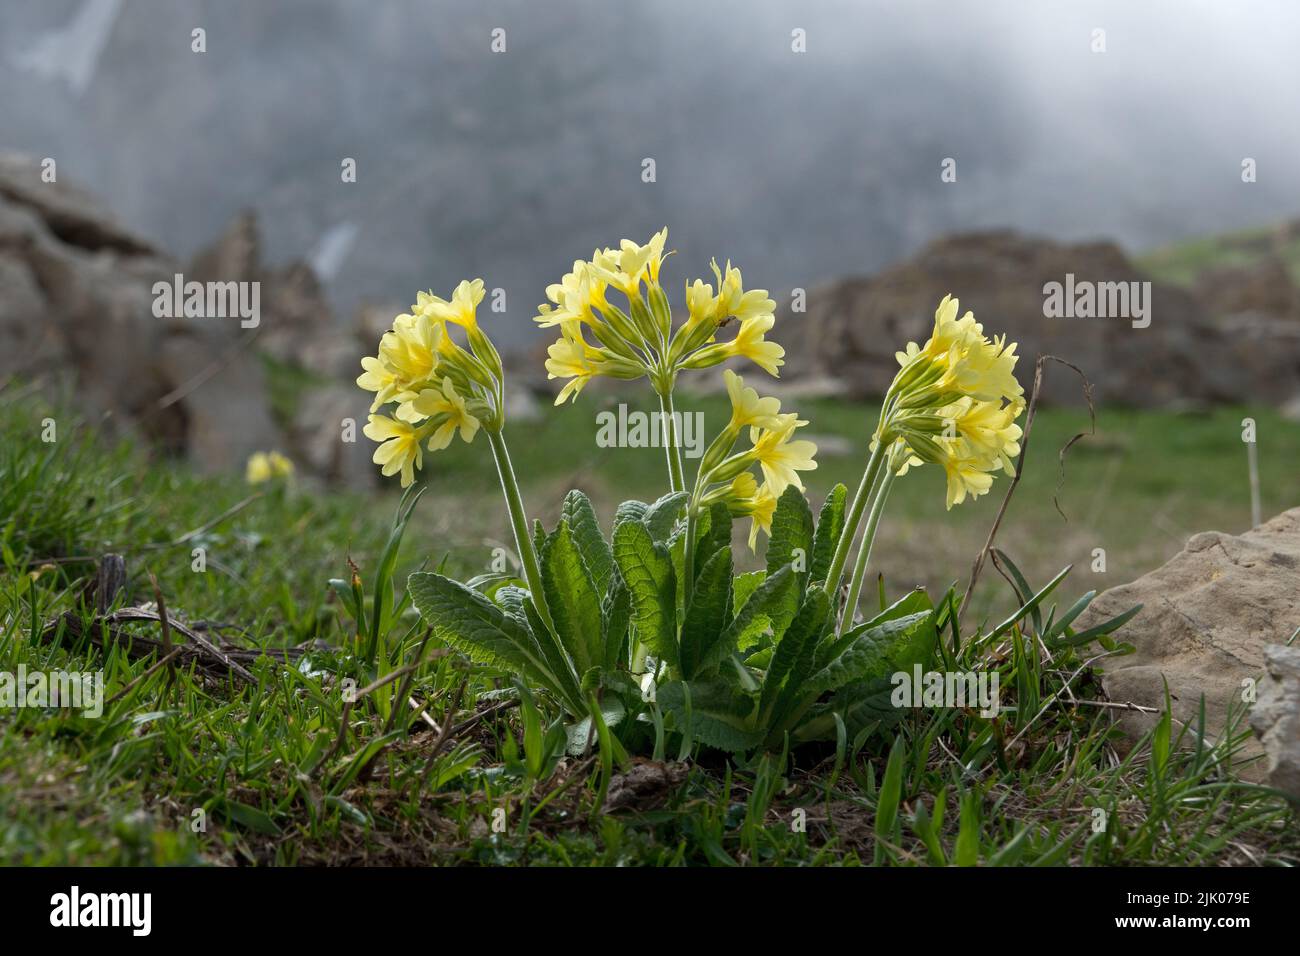 Auricula, also known as Mountain cowslip or Bear’s ear, yellow flowers, alpine landscape Stock Photo